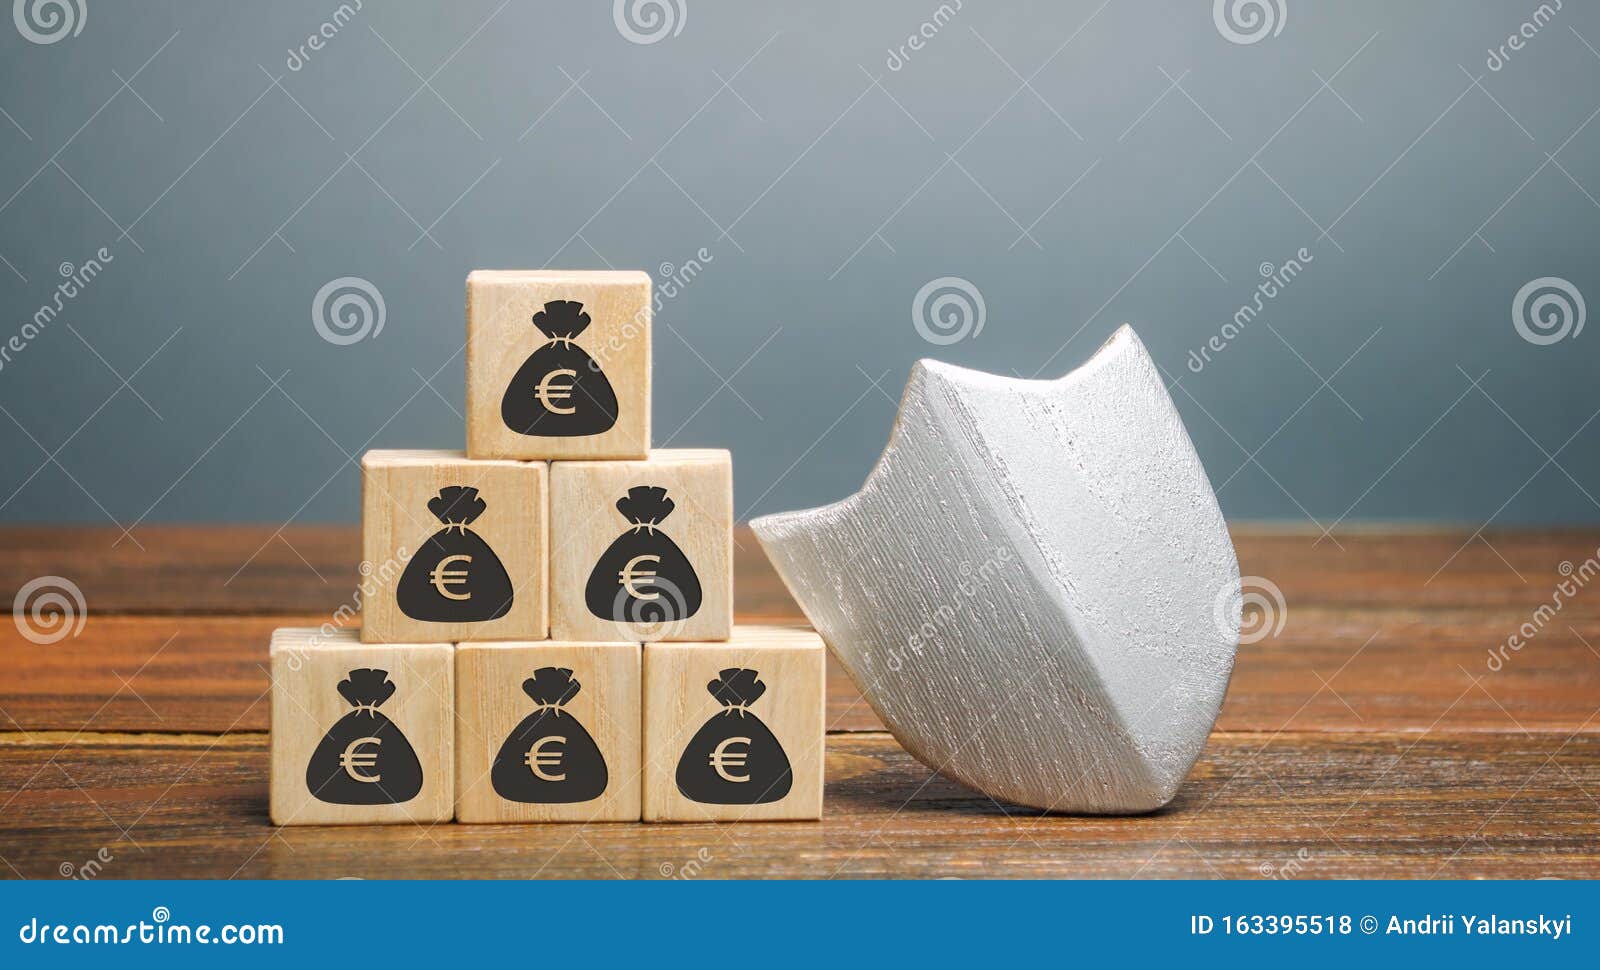 wooden blocks with money and protection shield. concept security of money, guaranteed deposits. client rights protection.